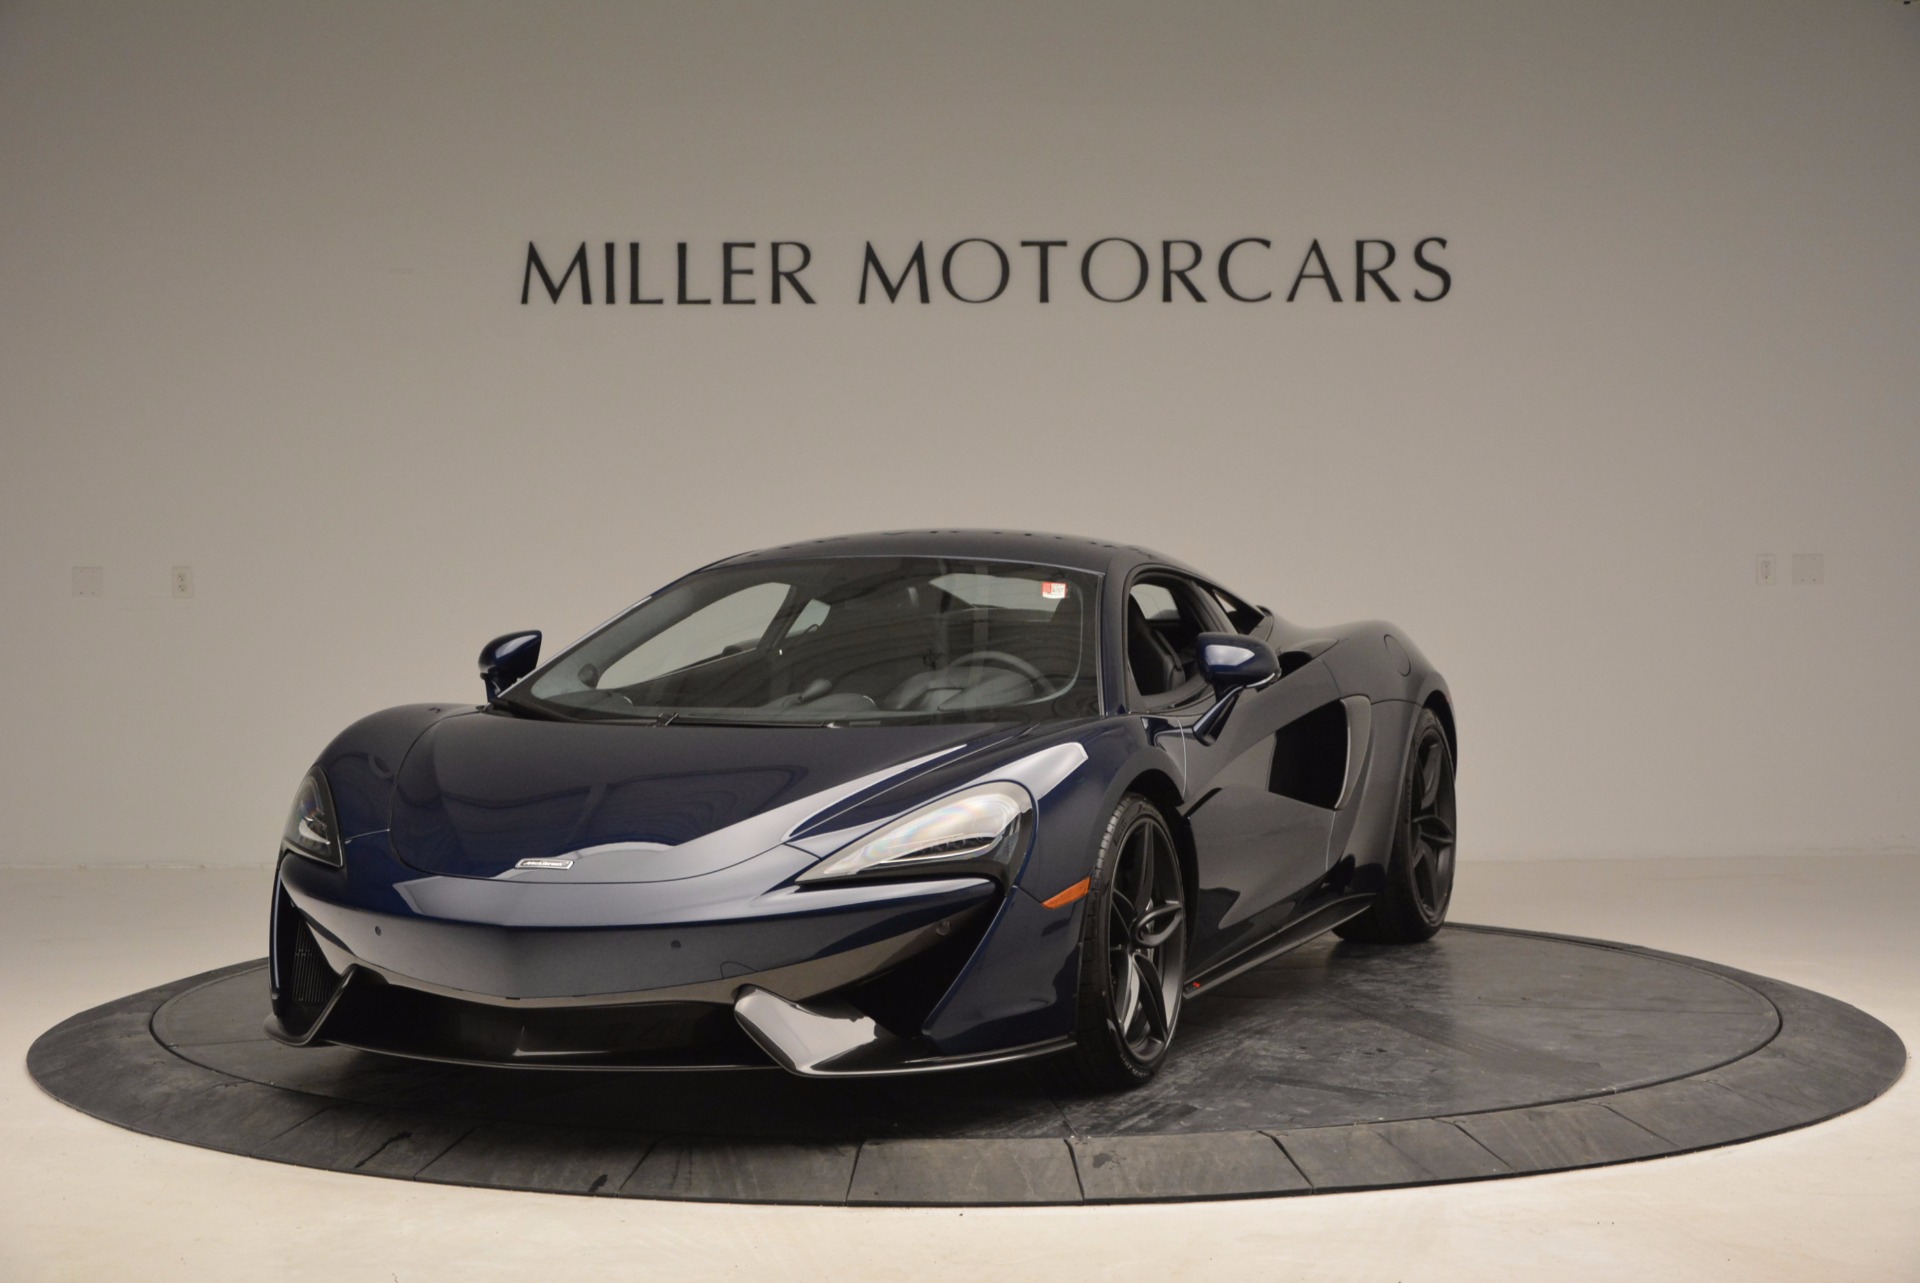 Used 2017 McLaren 570S for sale Sold at Bugatti of Greenwich in Greenwich CT 06830 1